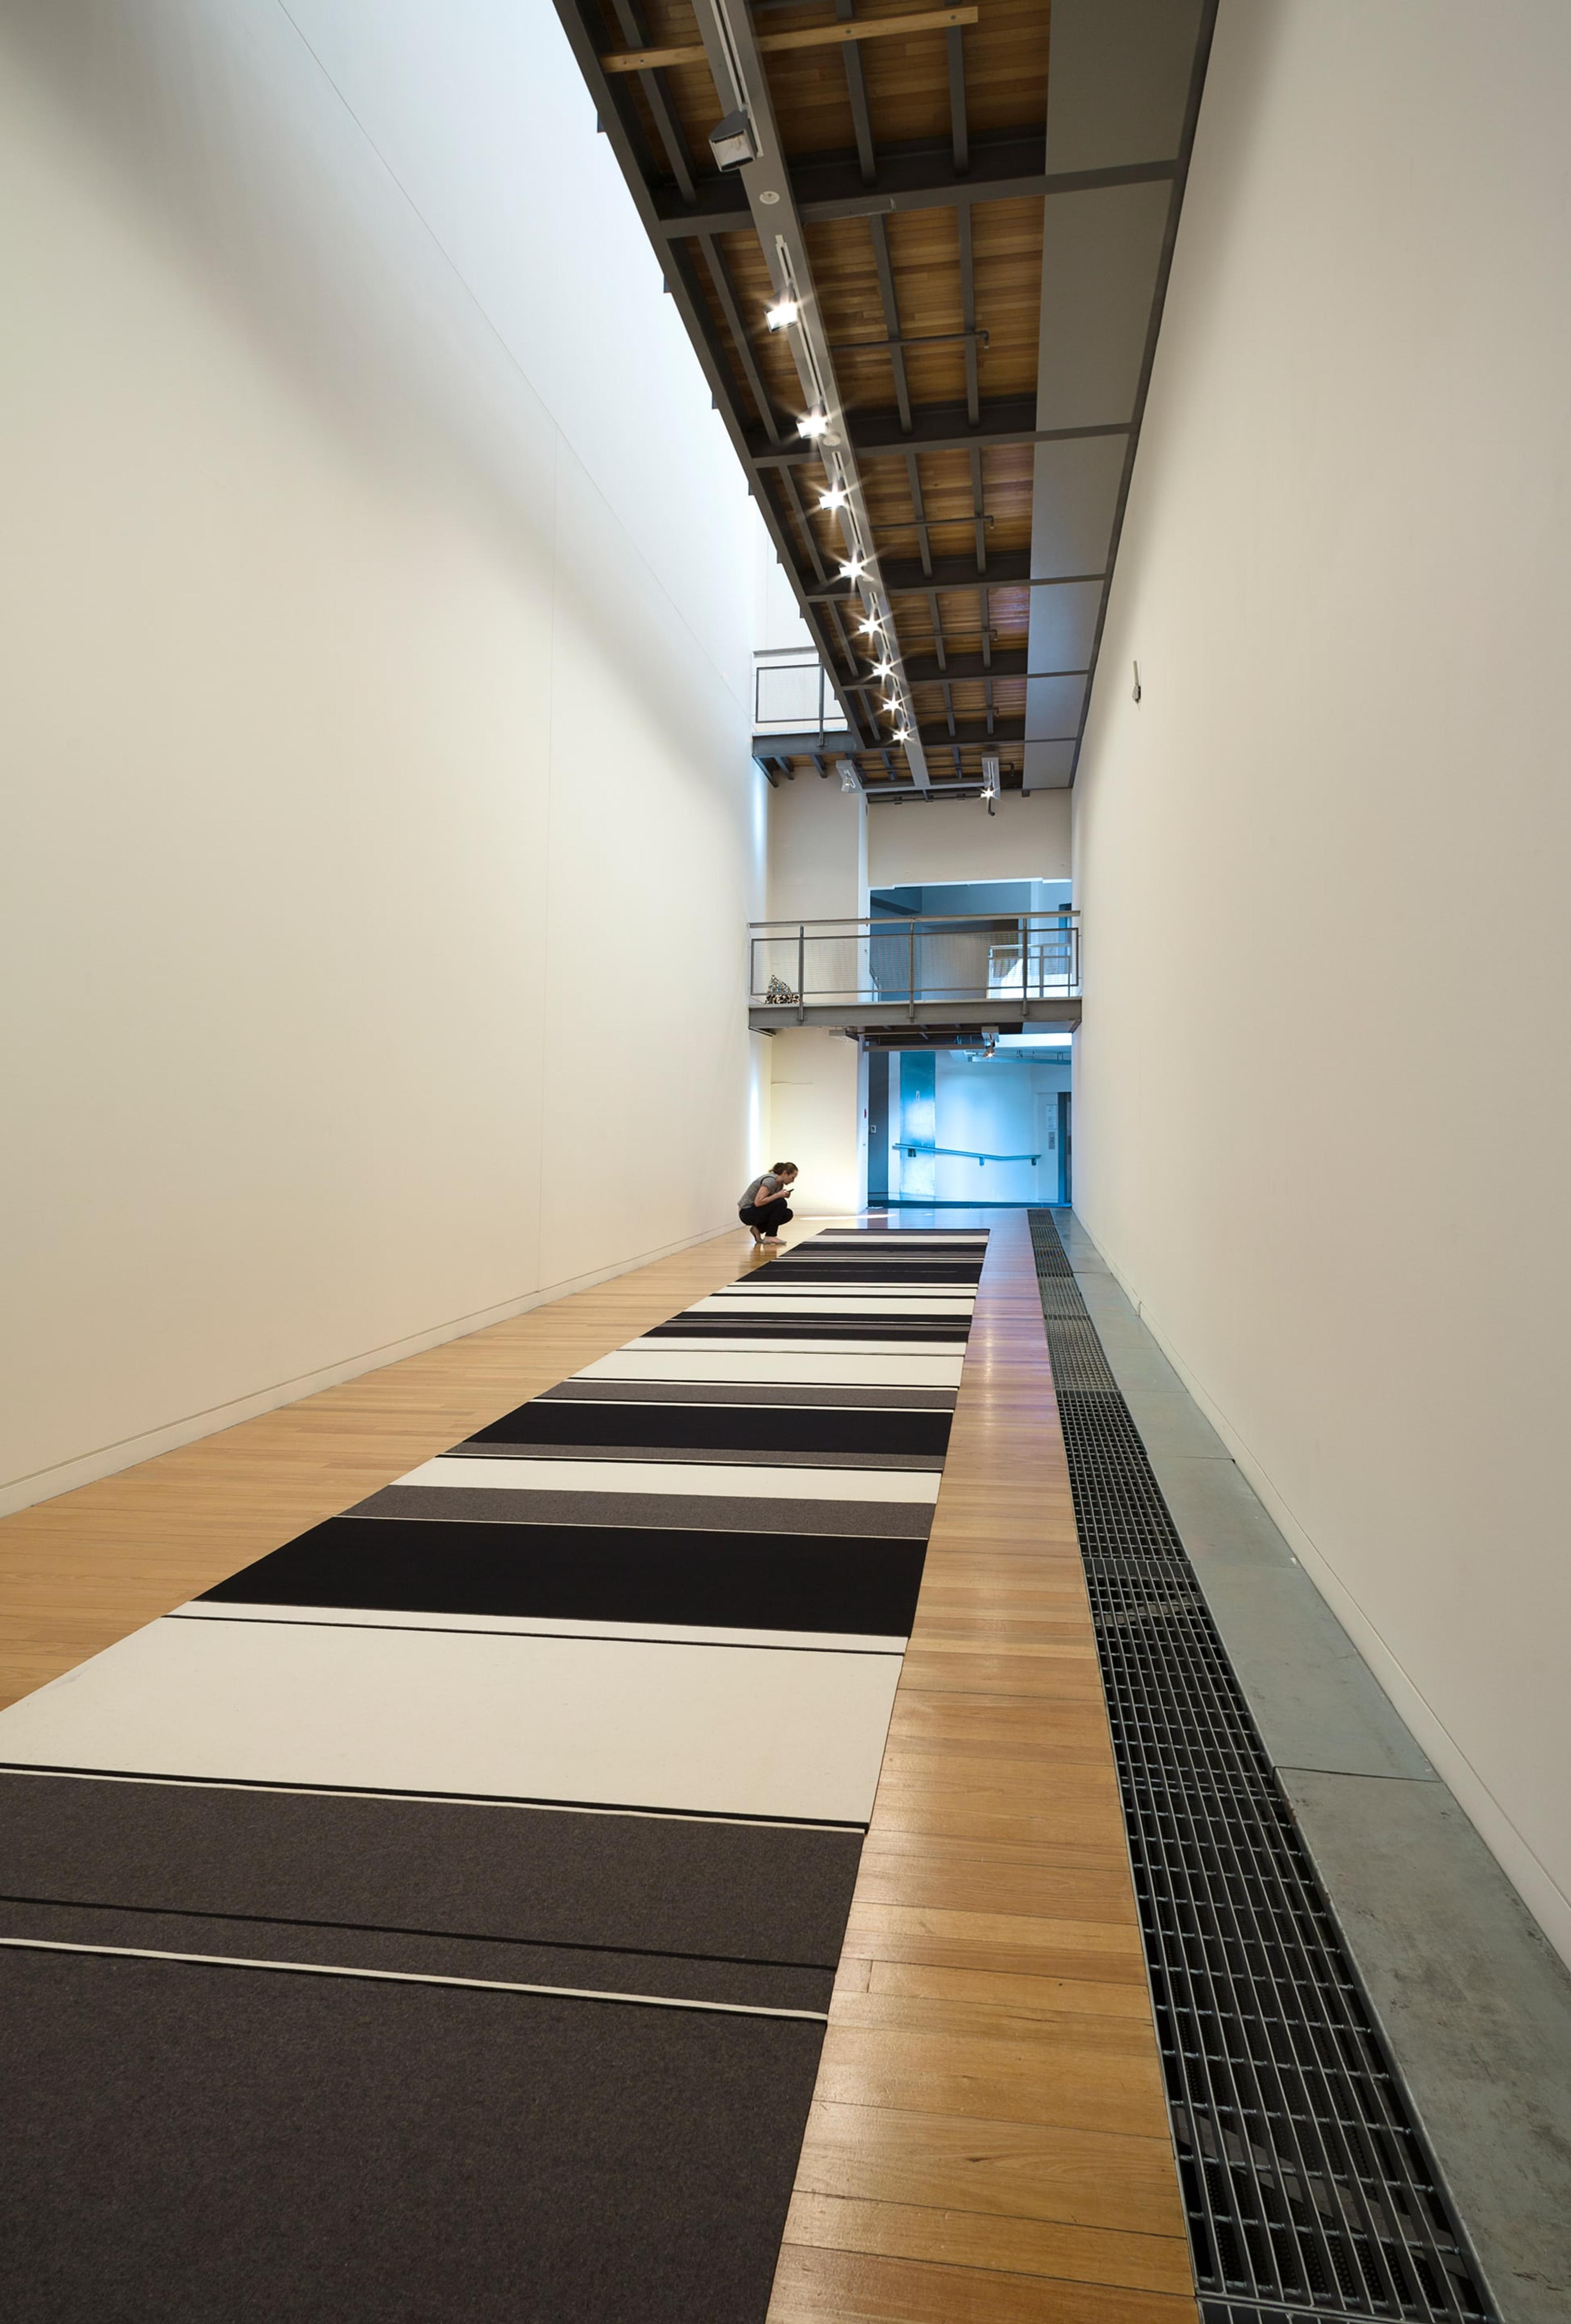 Installation view of Peter Robinson, Cuts and Junctures, 2013, cut wool felt, installation dimensions variable, at the Adam Art Gallery. Courtesy the artist and Peter McLeavey Gallery, Wellington. Photo: Shaun Waugh.